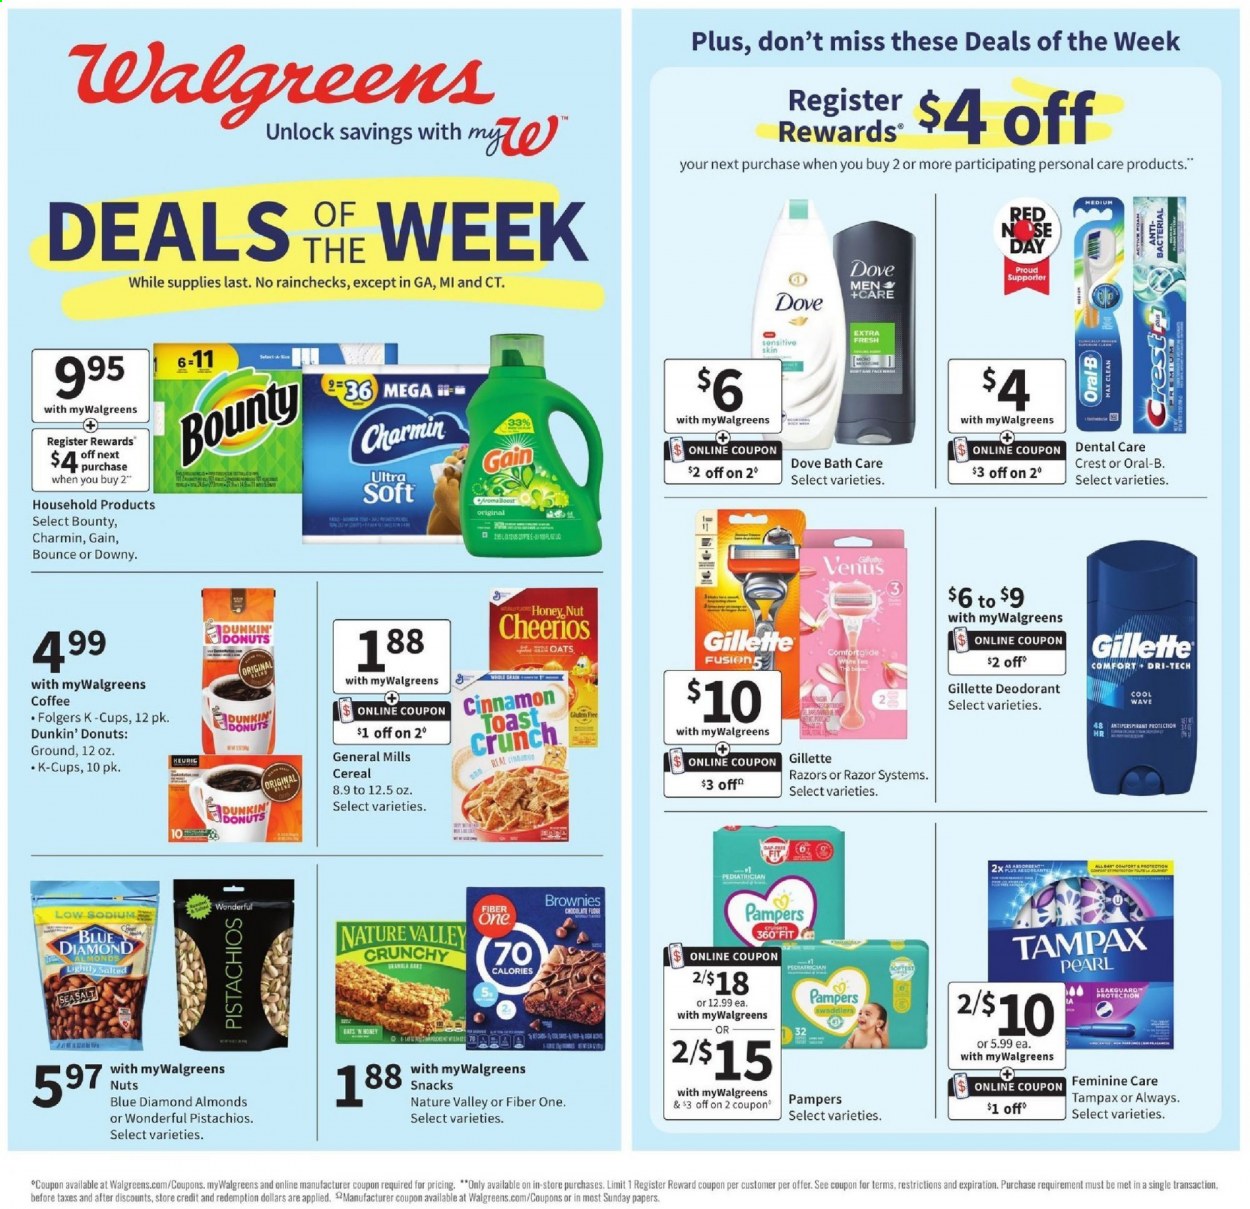 thumbnail - Walgreens Flyer - 04/11/2021 - 04/17/2021 - Sales products - snack, Bounty, brownies, donut, oats, cereals, Cheerios, Nature Valley, Fiber One, almonds, pistachios, Blue Diamond, coffee, Folgers, coffee capsules, K-Cups, Dunkin' Donuts, Pampers, Charmin, Gain, Downy Laundry, Dove, Oral-B, Crest, Tampax, anti-perspirant, deodorant, Gillette, razor. Page 1.